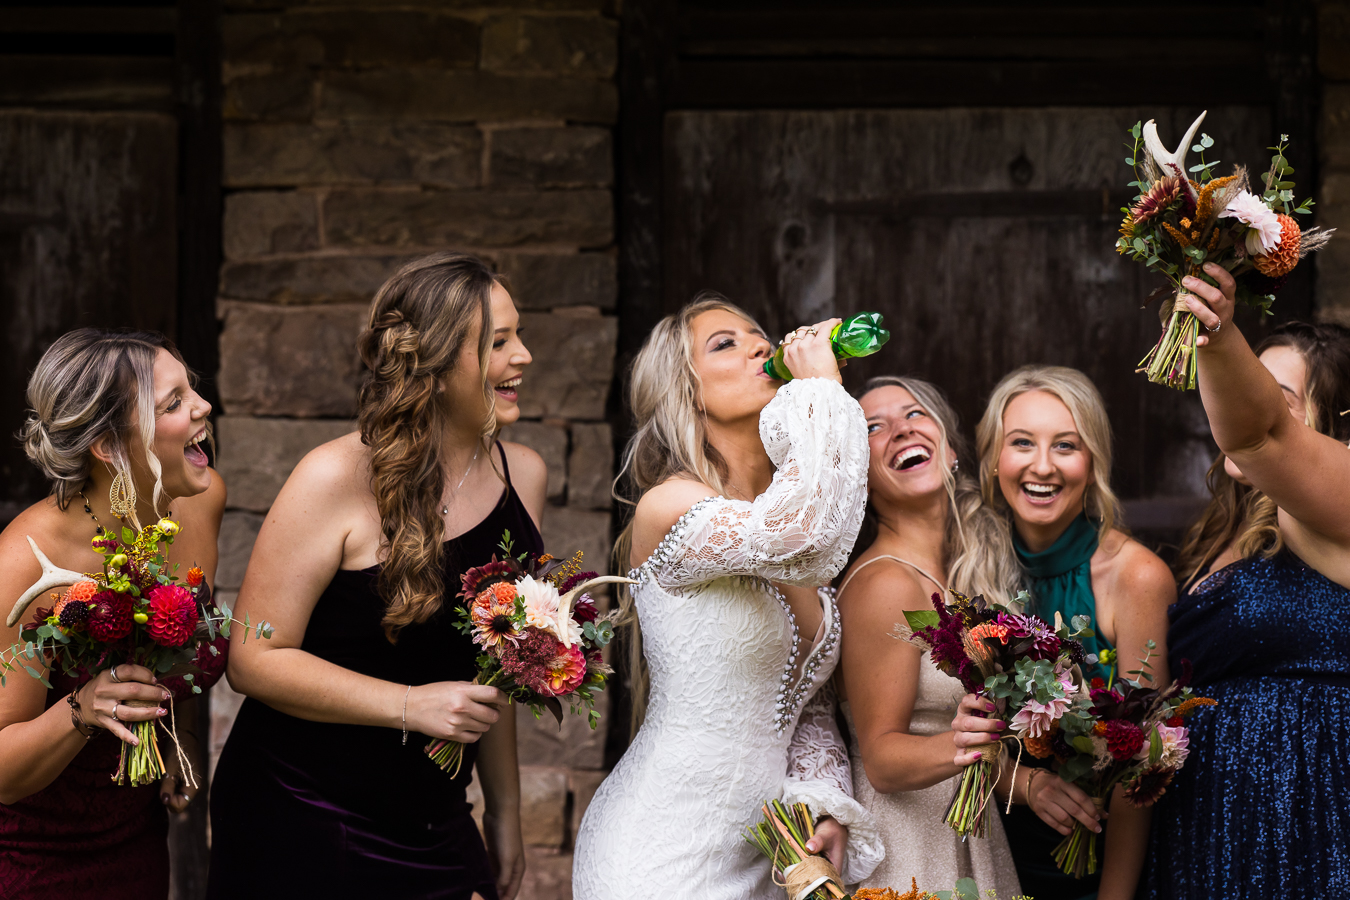 fun, unique, candid image of the bride as she chugs Mountain Dew while her bridesmaids cheer her on and laugh during their wedding party pictures